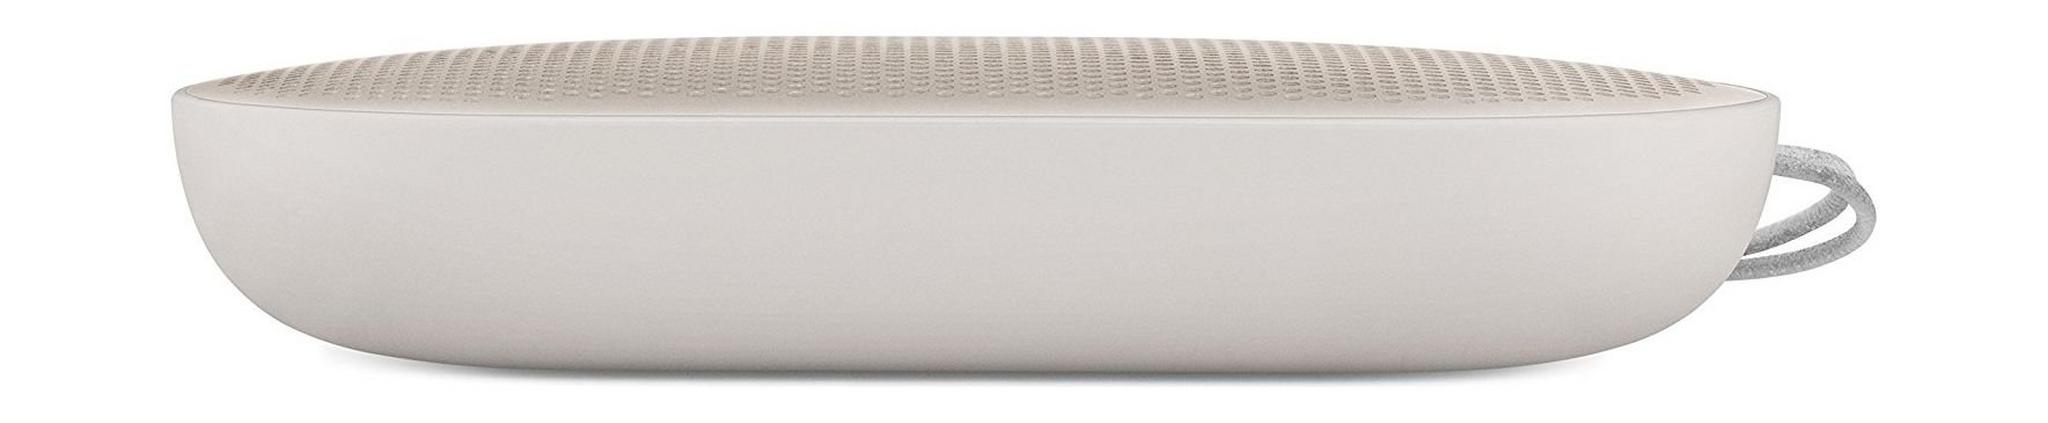 B&O PLAY by Bang & Olufsen Beoplay P2 Portable Bluetooth Speaker with Built-In Microphone - Sand Stone